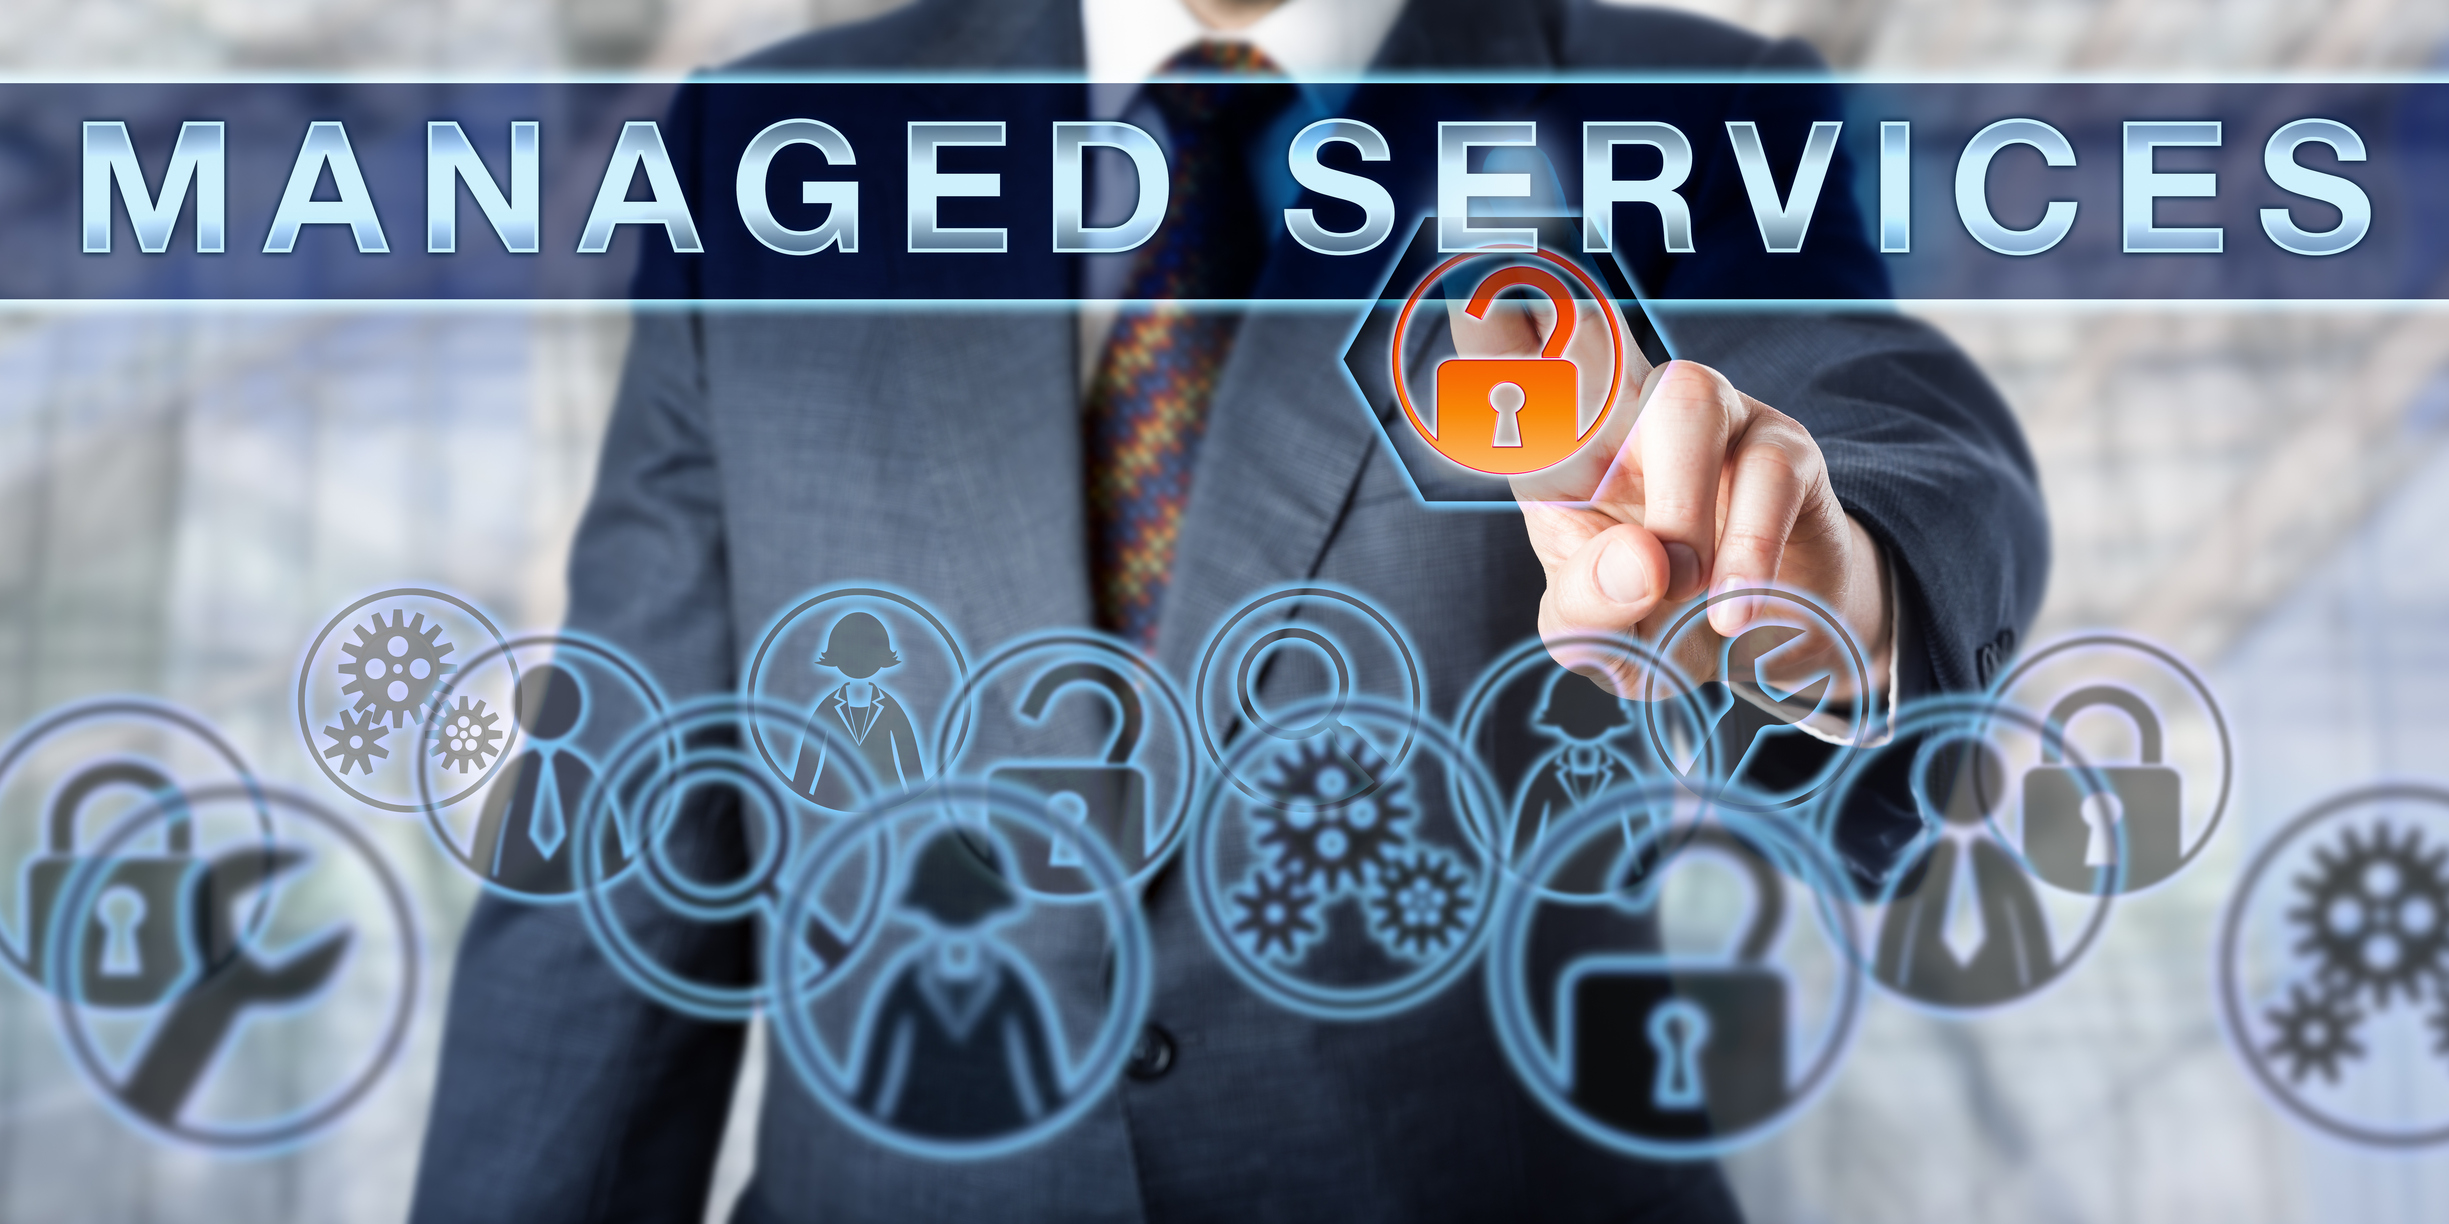 Having Managed IT Services